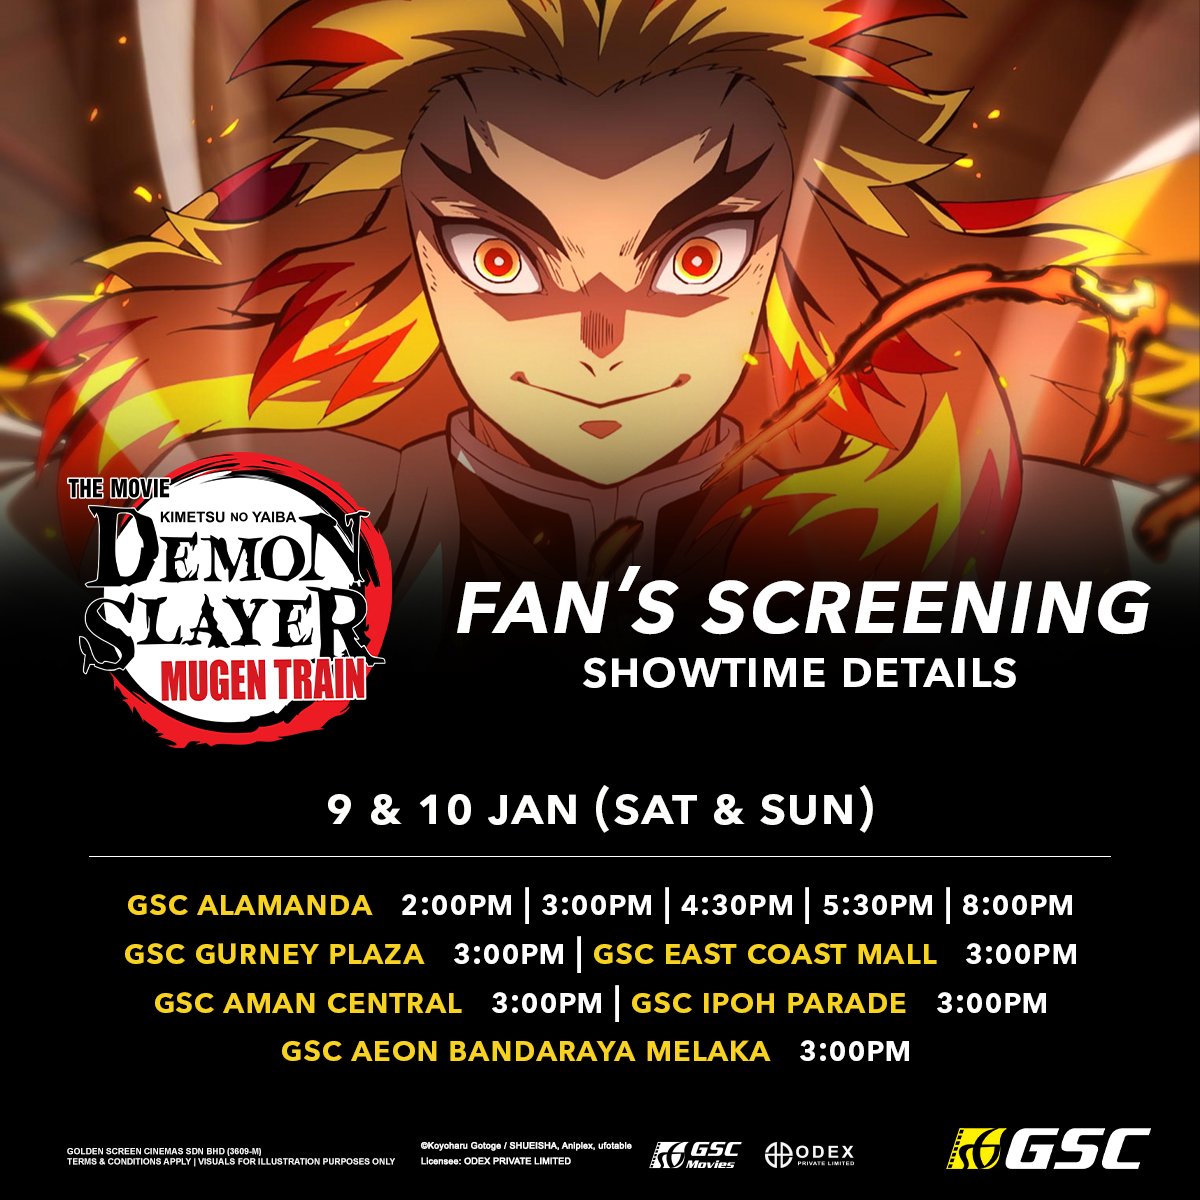 Gsc Getvaccinated A Twitter Here Are The Showtimes For Demonslayer Fan S Screening Plan For Your Movie Screening And Get Your Tickets Tomorrow 3pm Onwards As For Other States Don T Worry We